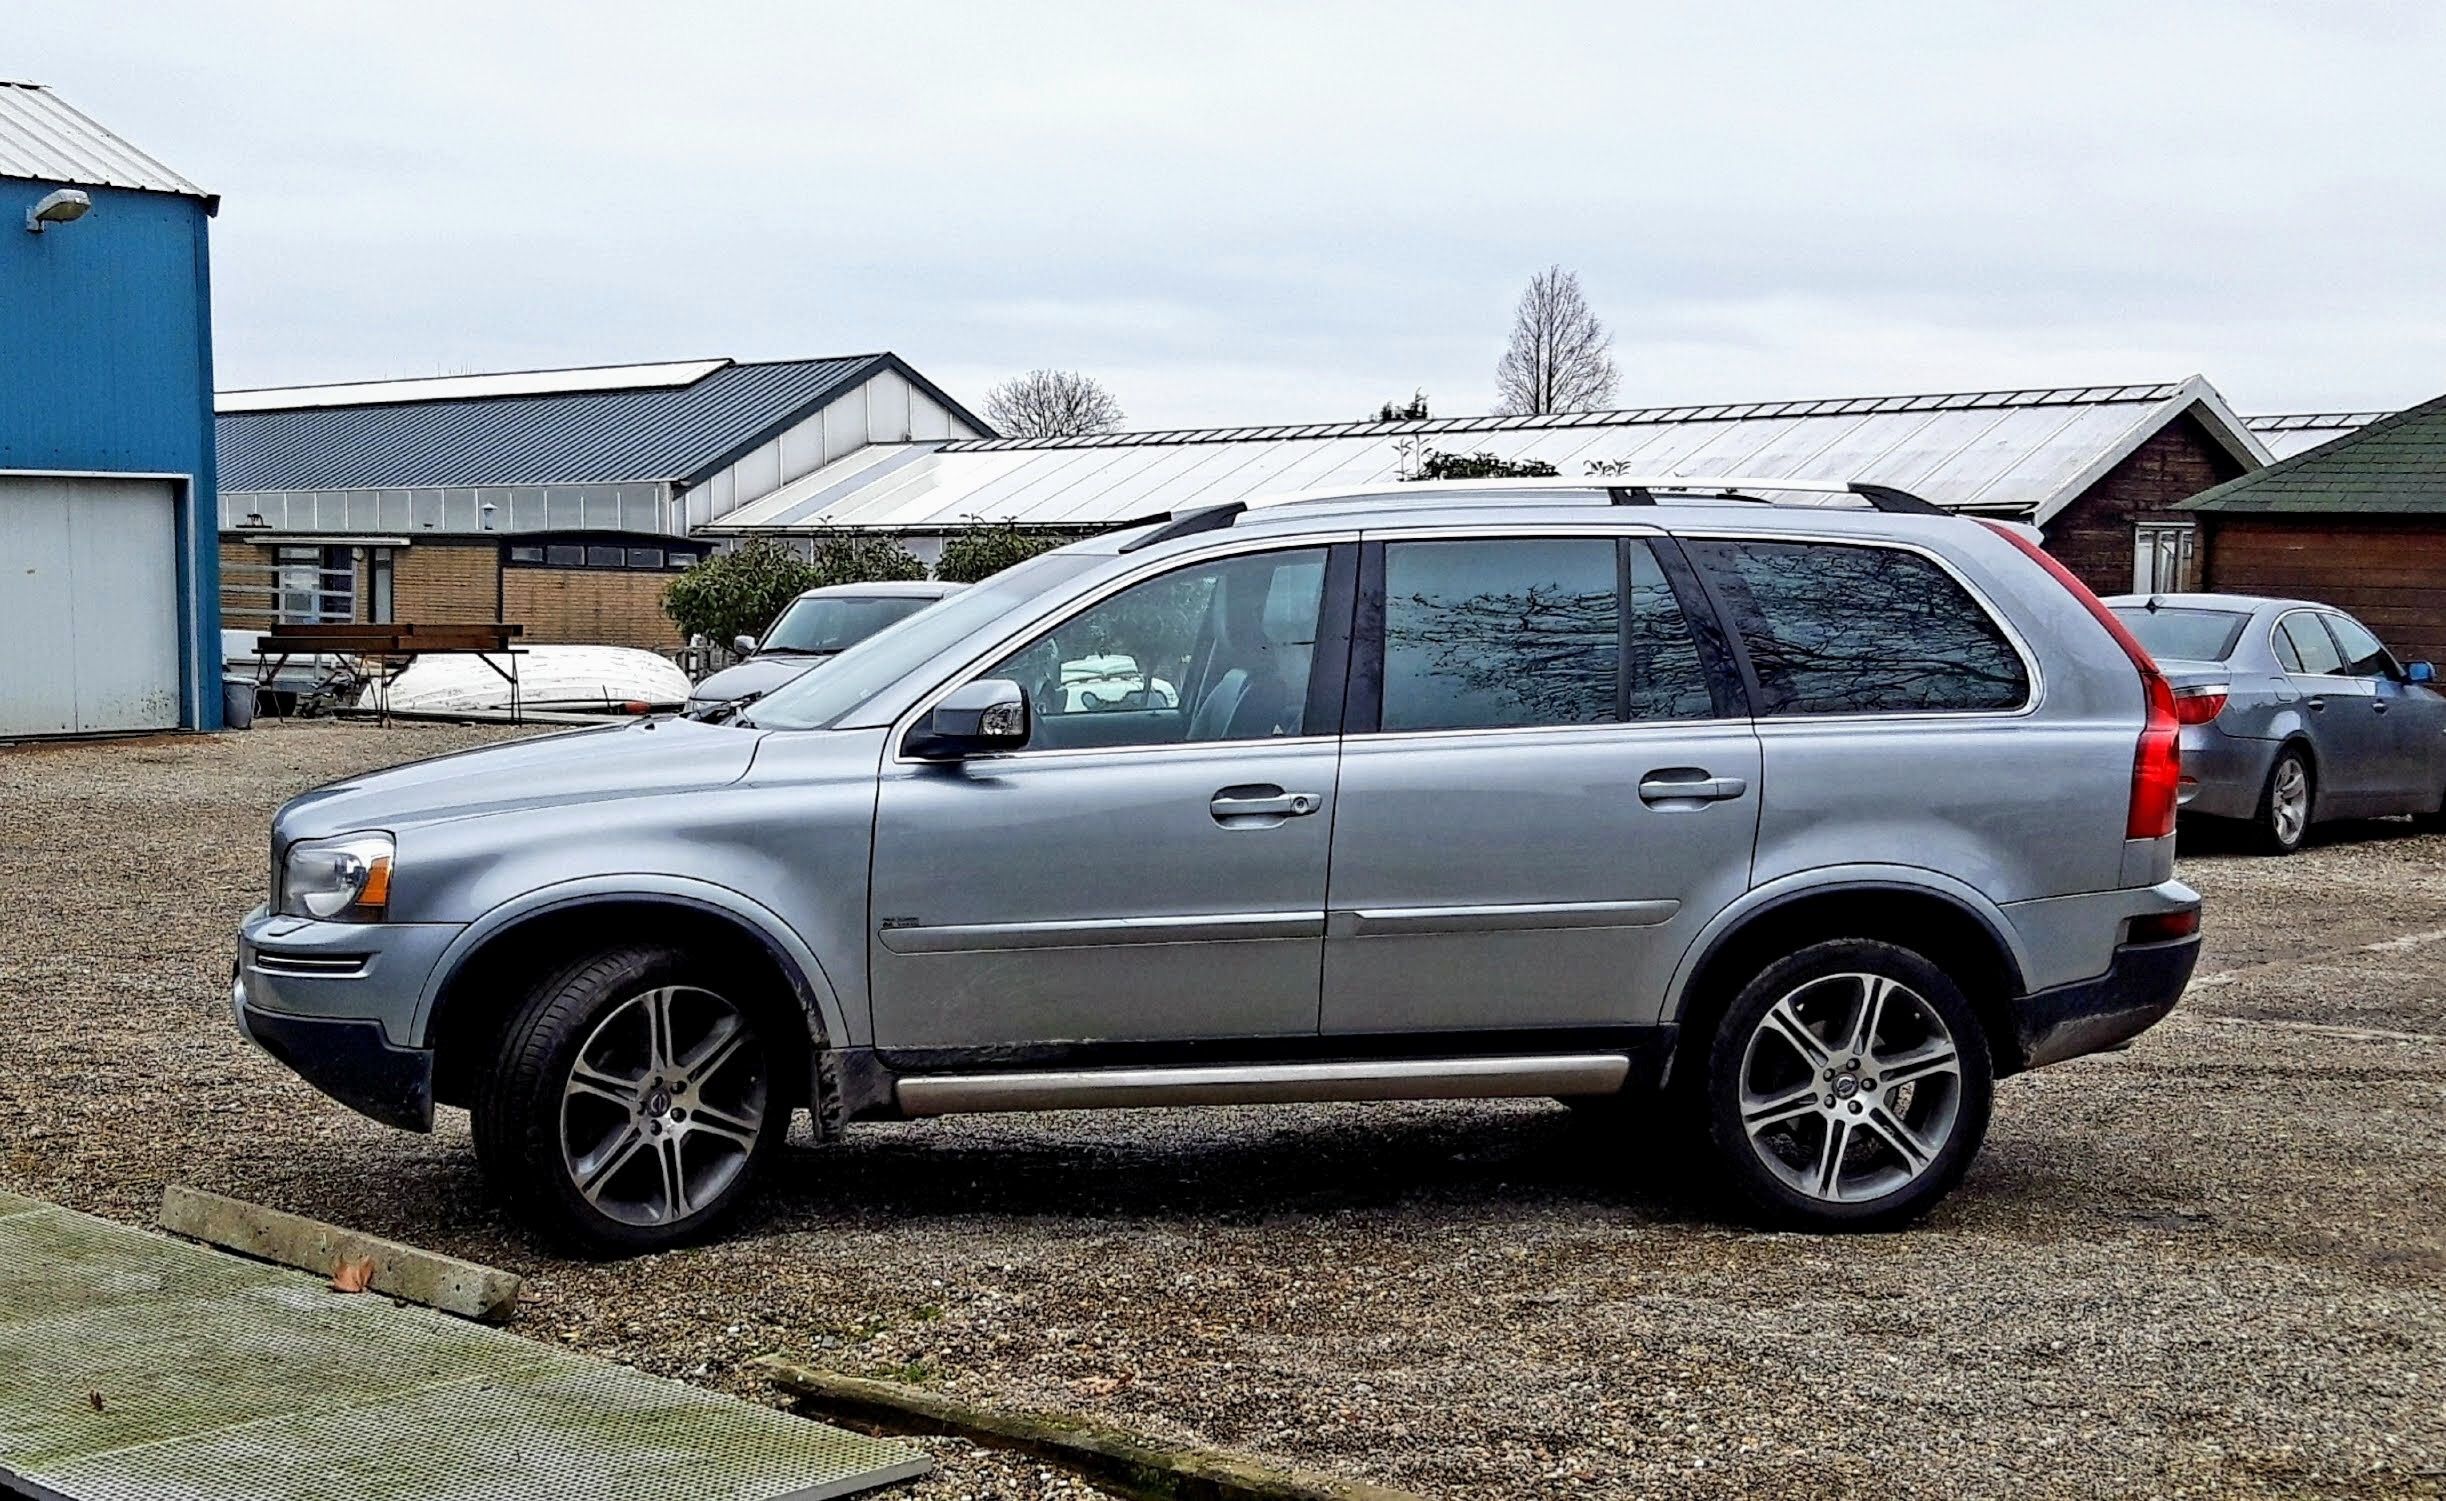 2011 Volvo XC90 Limited Edition | Electric Silver | 20' Thalassa Volvo  wheels | Volvo xc90, Volvo xc, Volvo